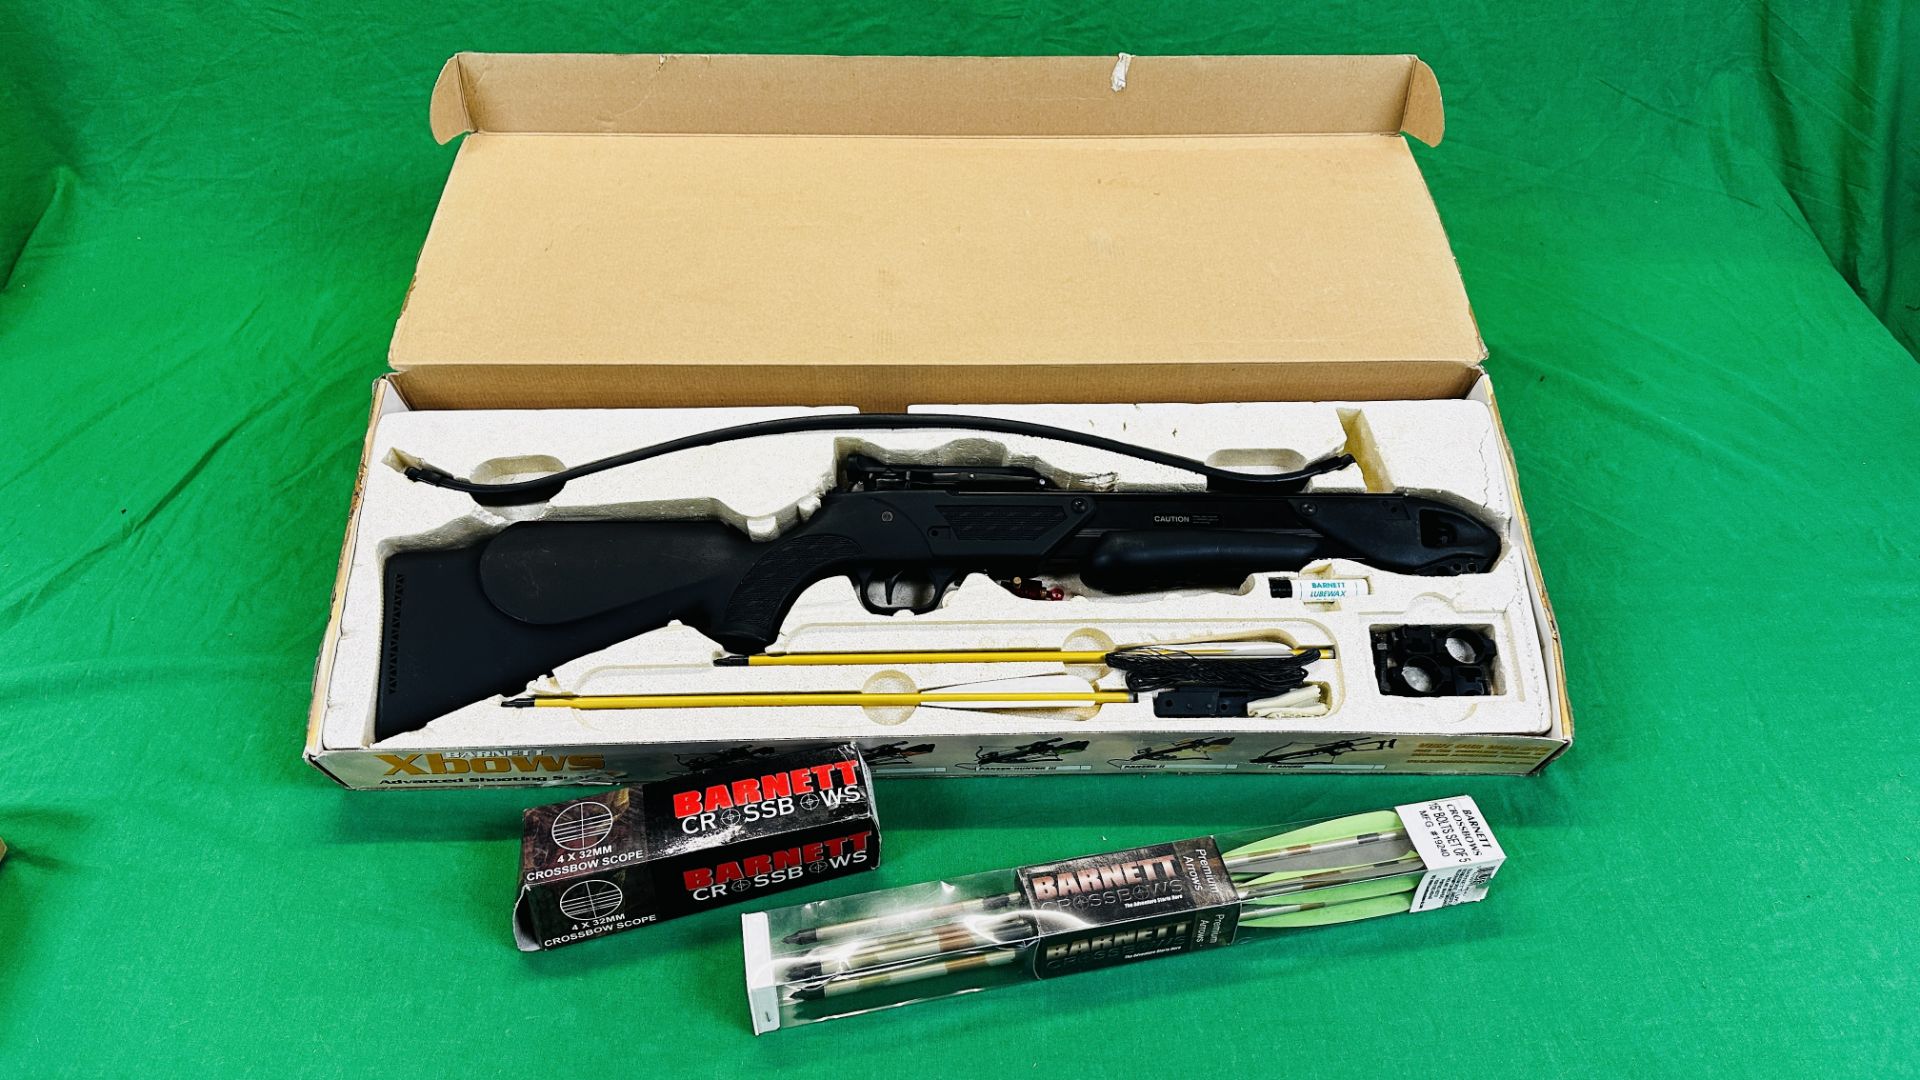 BOXED BARNETT XBOWS CROSSBOW WITH ARROWS AND 4X32 SCOPE - NO POSTAGE OF PACKING AVAILABLE